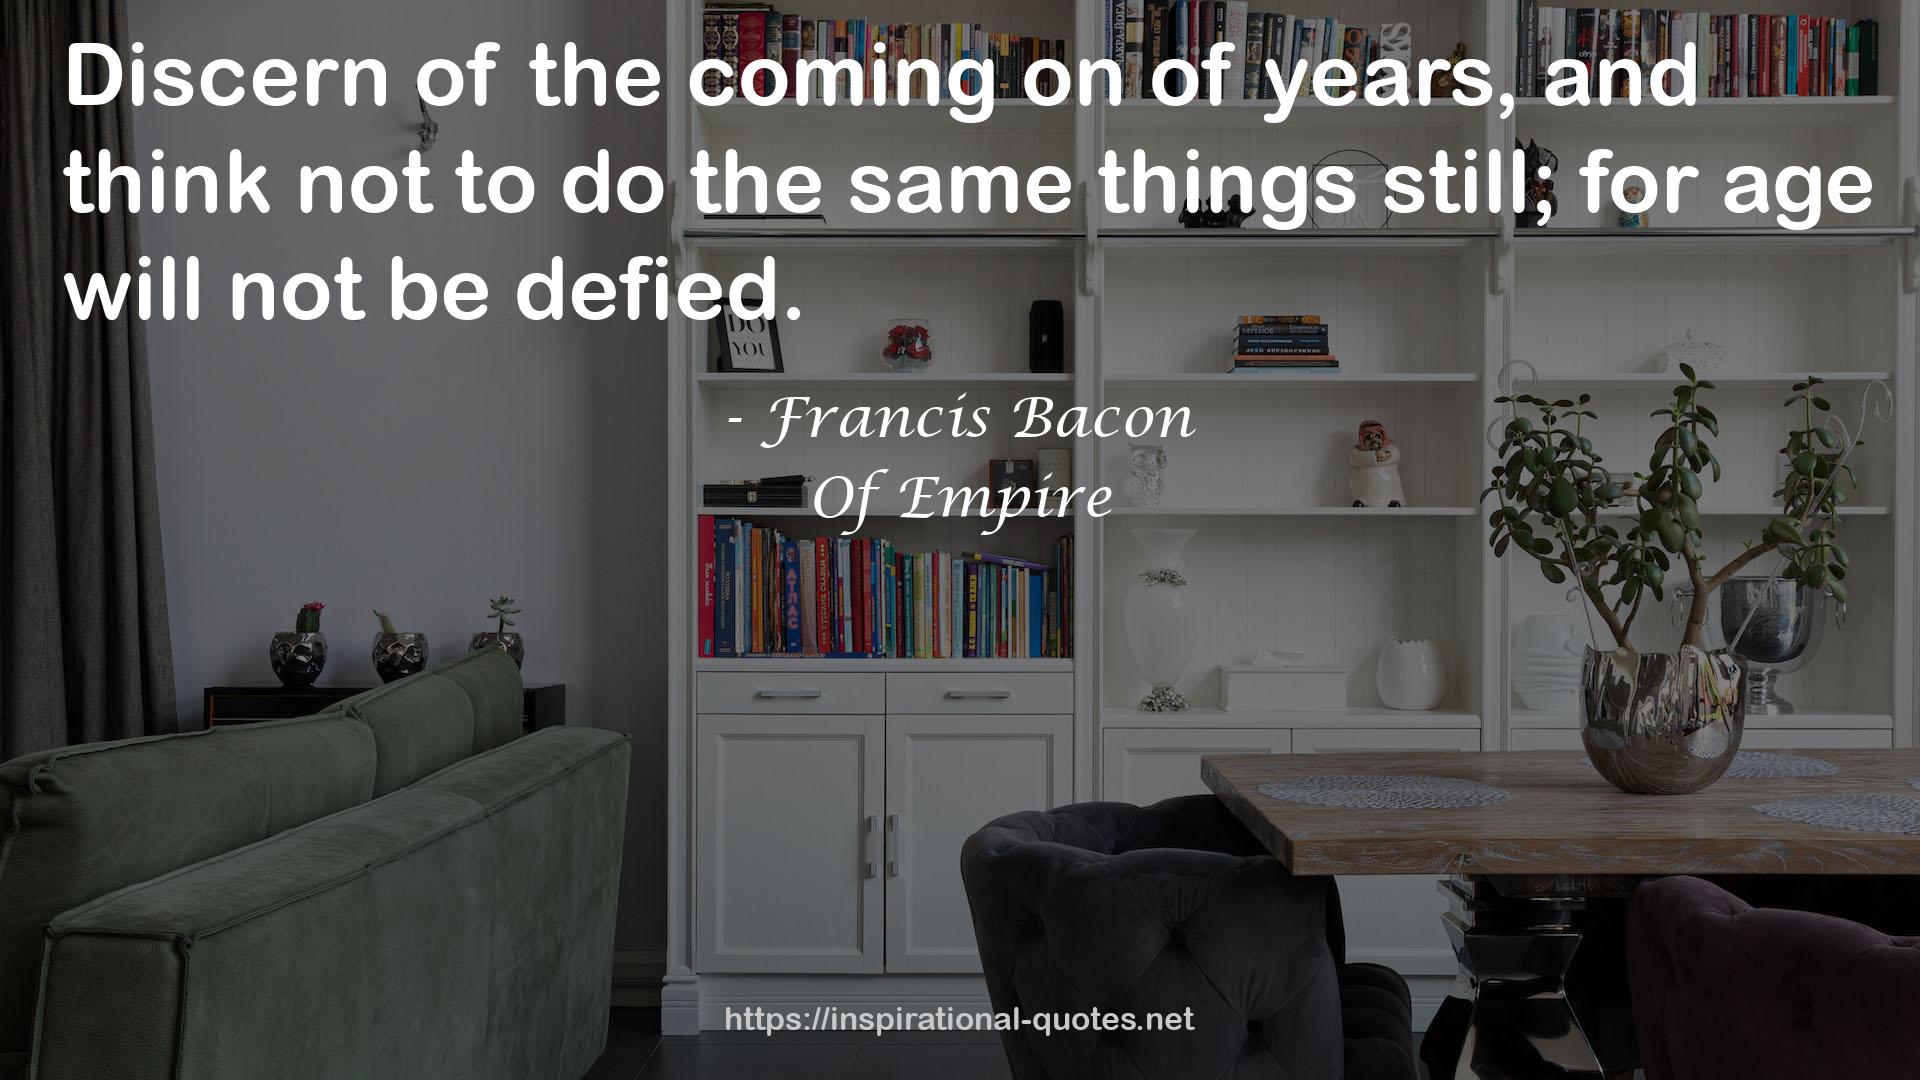 Of Empire QUOTES